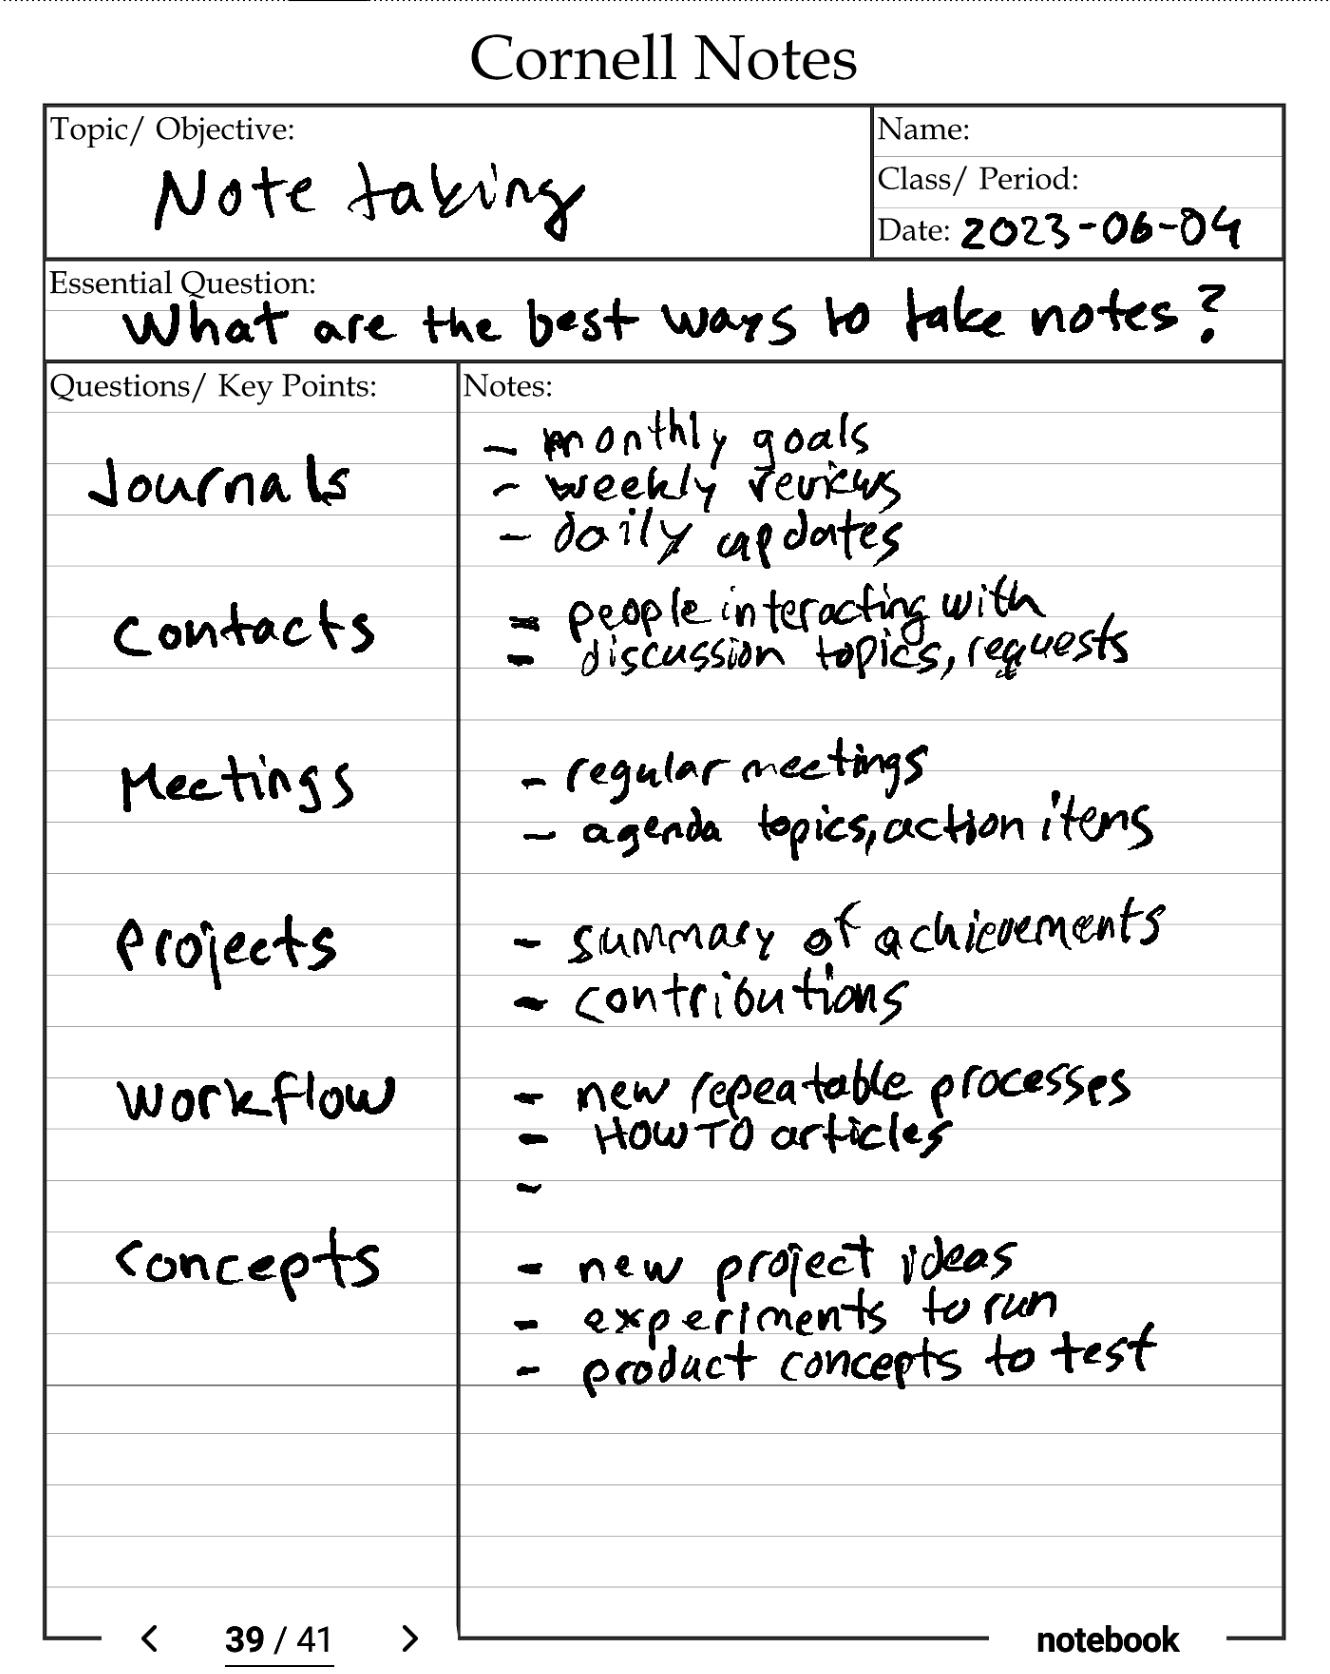 Improve Your Note-Taking Skills with a Powerful 6-Step System